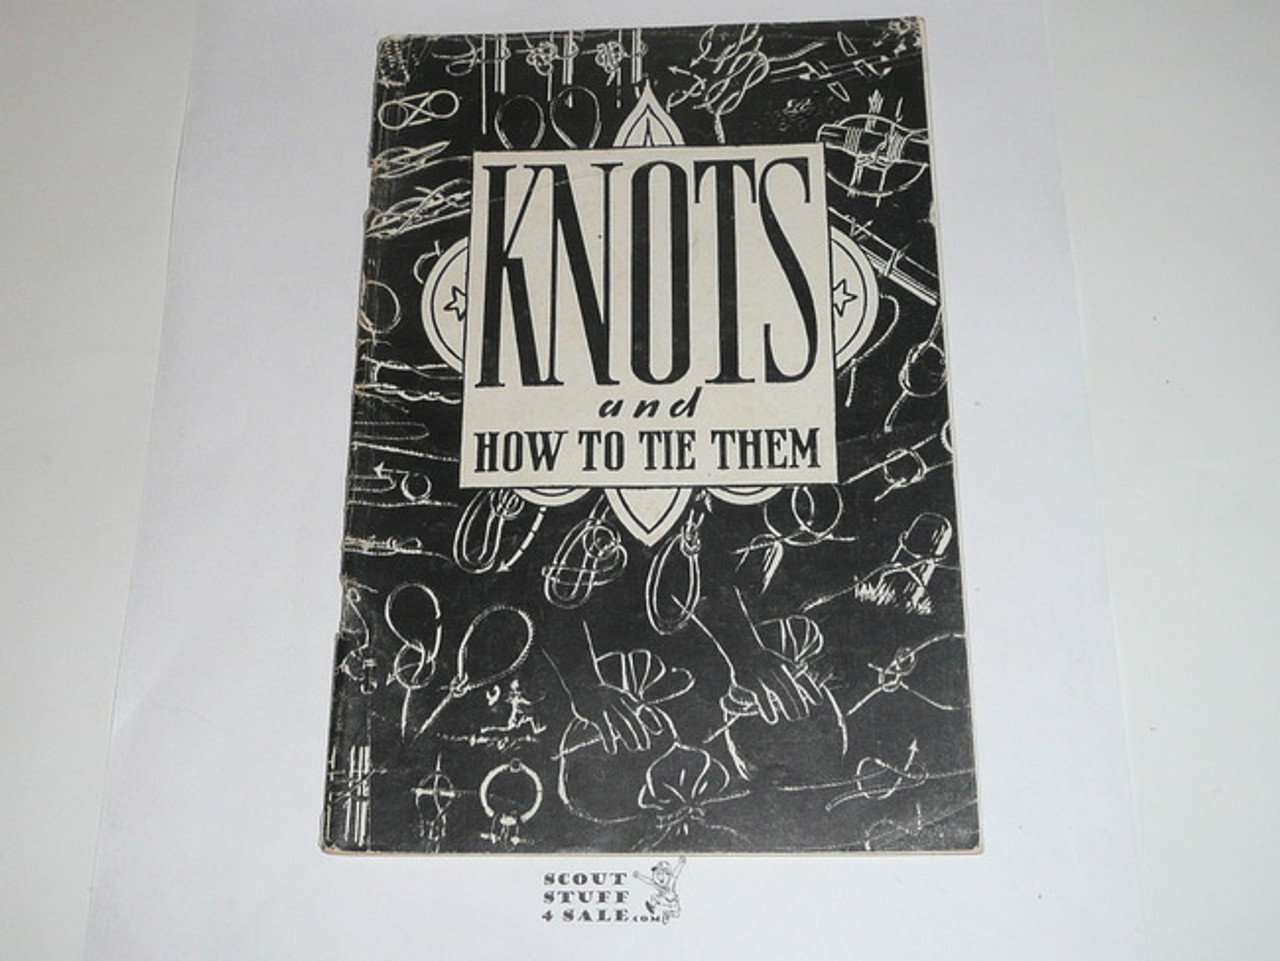 Knots and How to Tie Them, 7-65 Printing